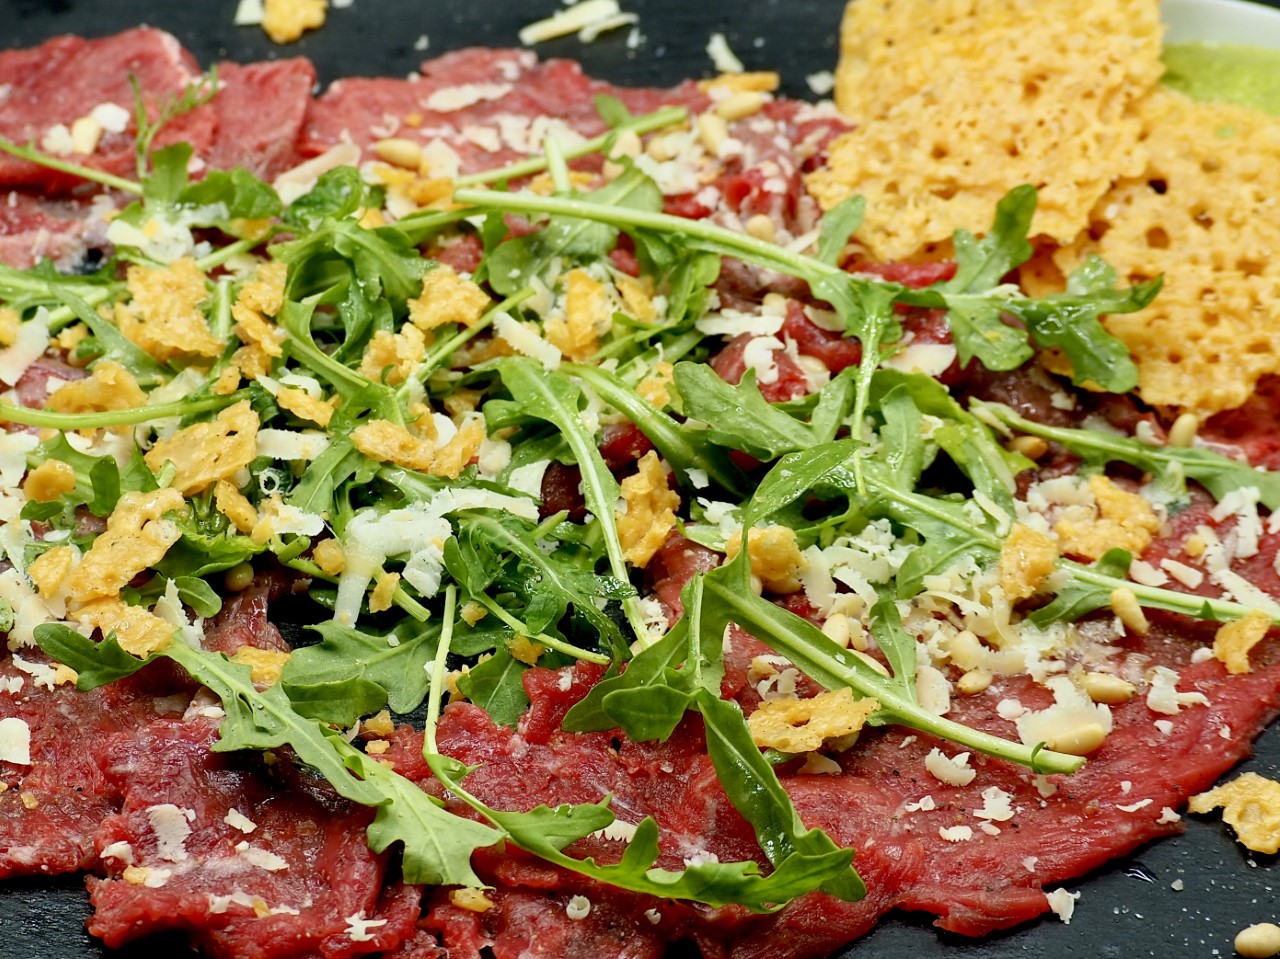 Beef Carpaccio with White Truffle Oil, and Parmesan Crisps